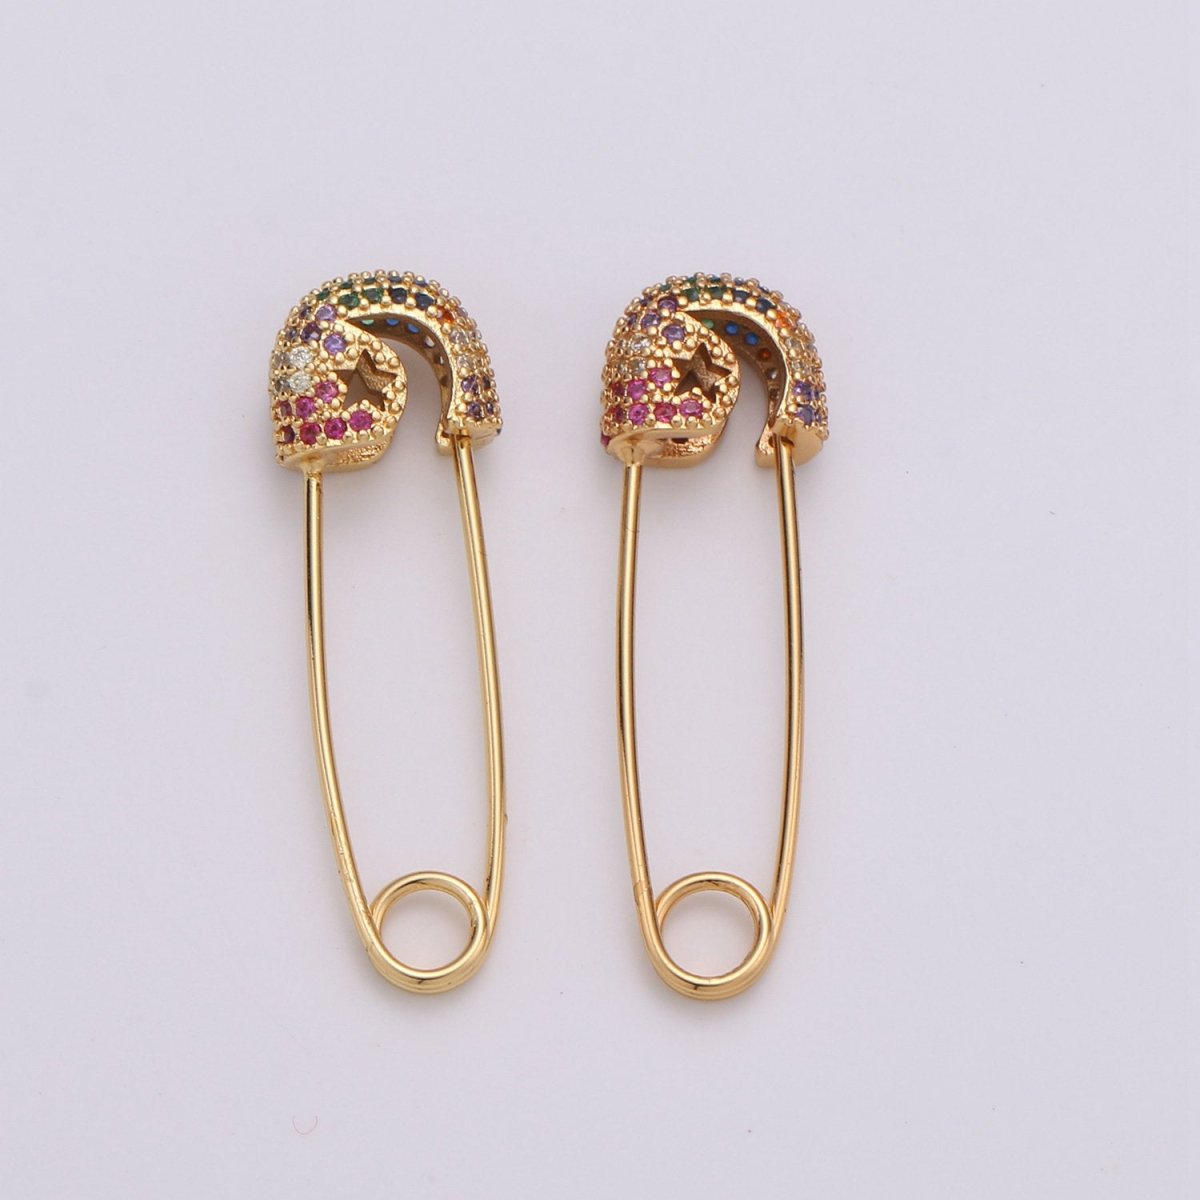 1x Safety Pin Collection Vermeil Gold CZ Diamond Colorful Micro Pave Small Earring Necklace Charm Pendant Gold Sterling Silver Rose Gold - DLUXCA